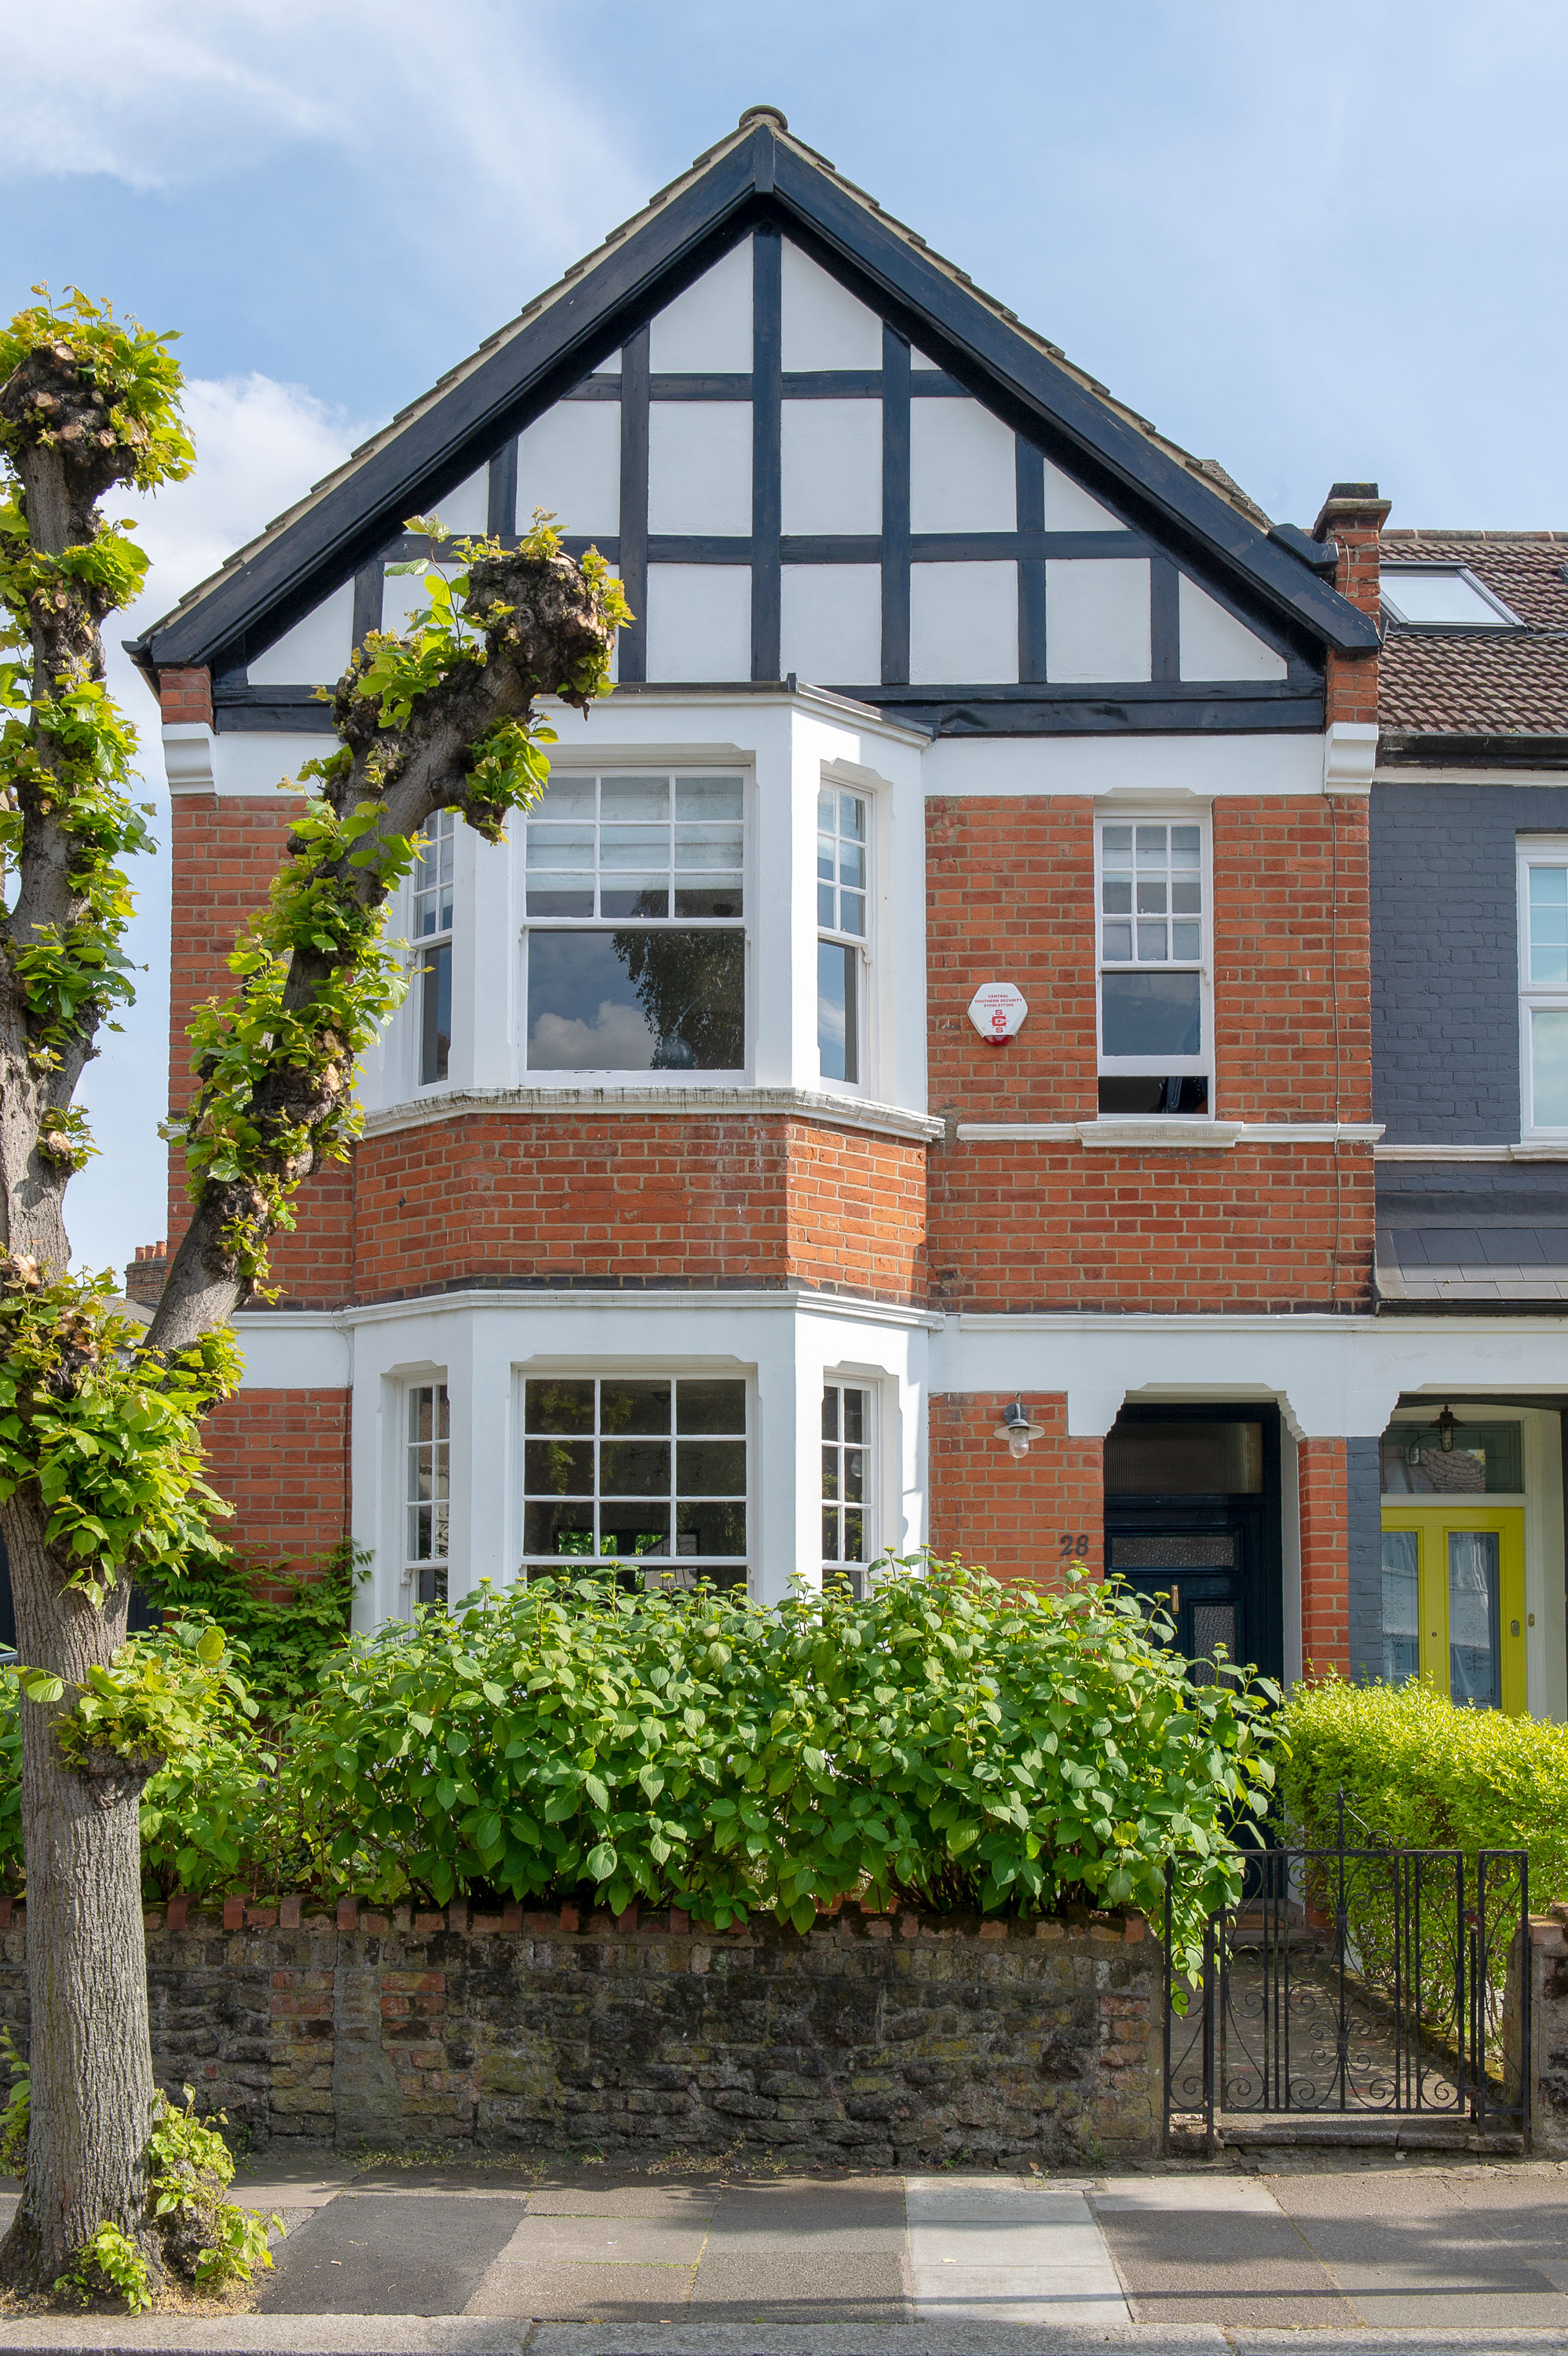 Real home: this Renovated Edwardian home is full of colour and